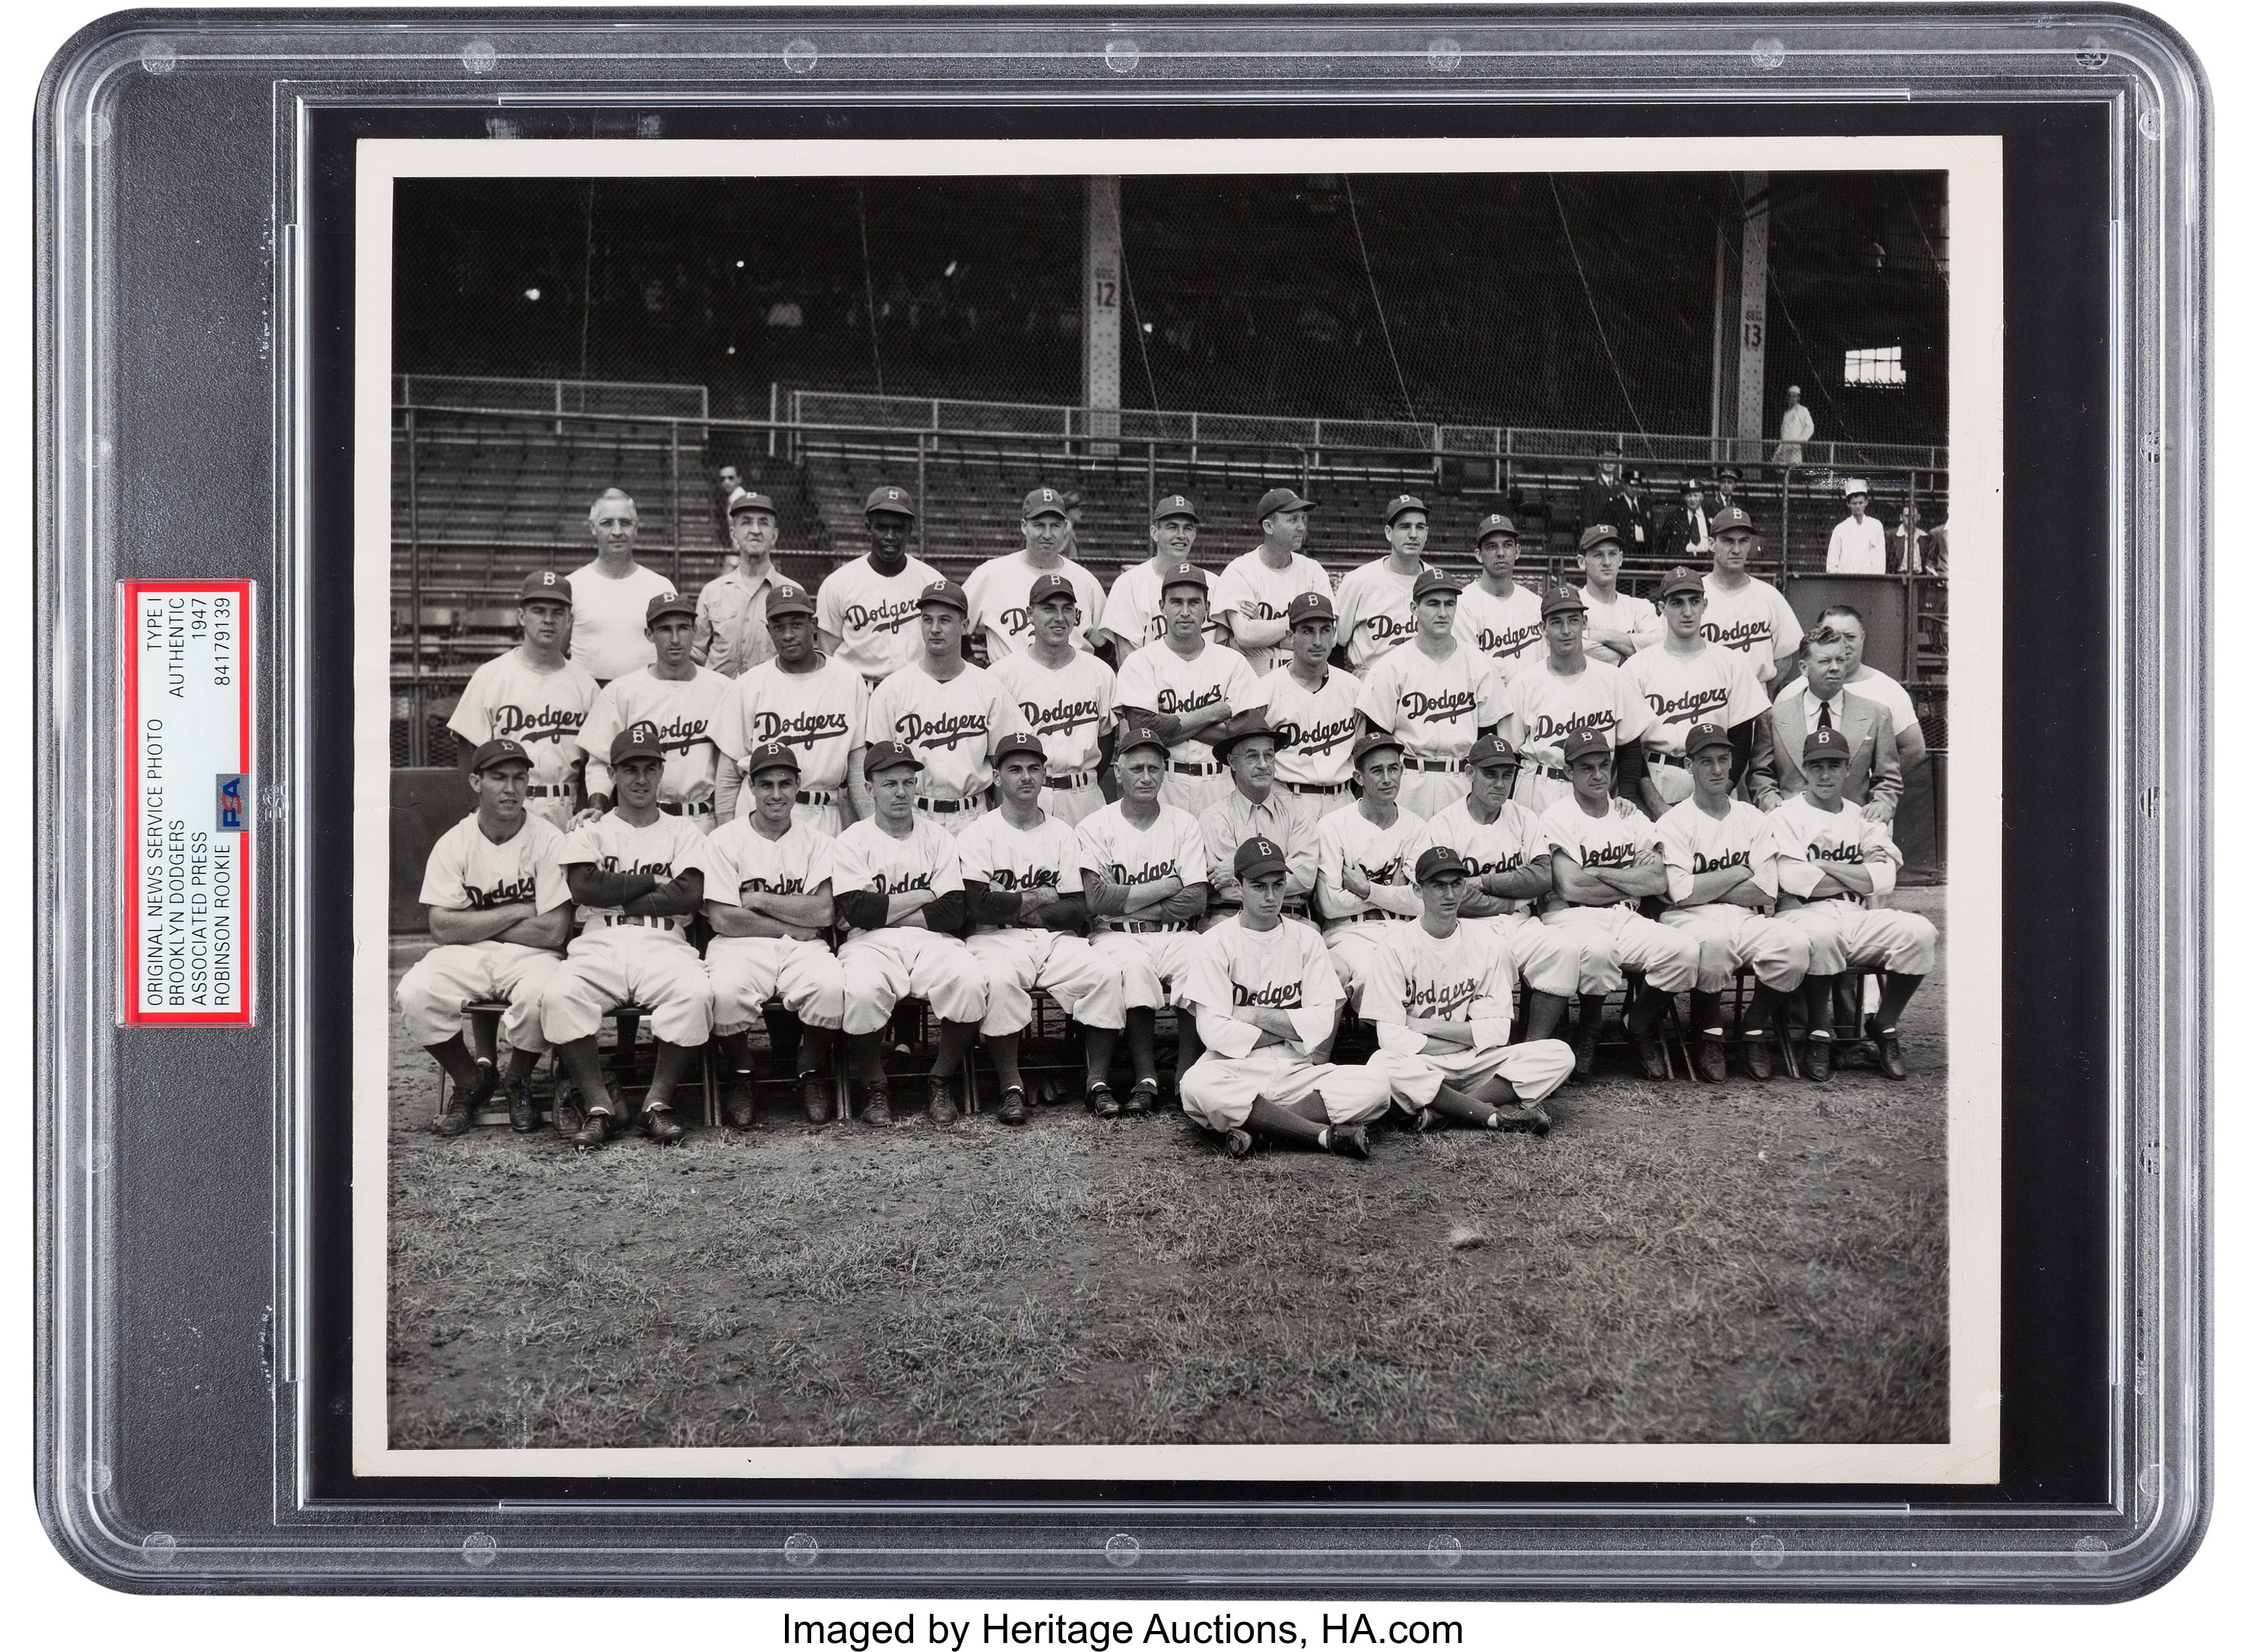 Sold at Auction: 1947 Brooklyn Dodgers team photograph (NL Champions).